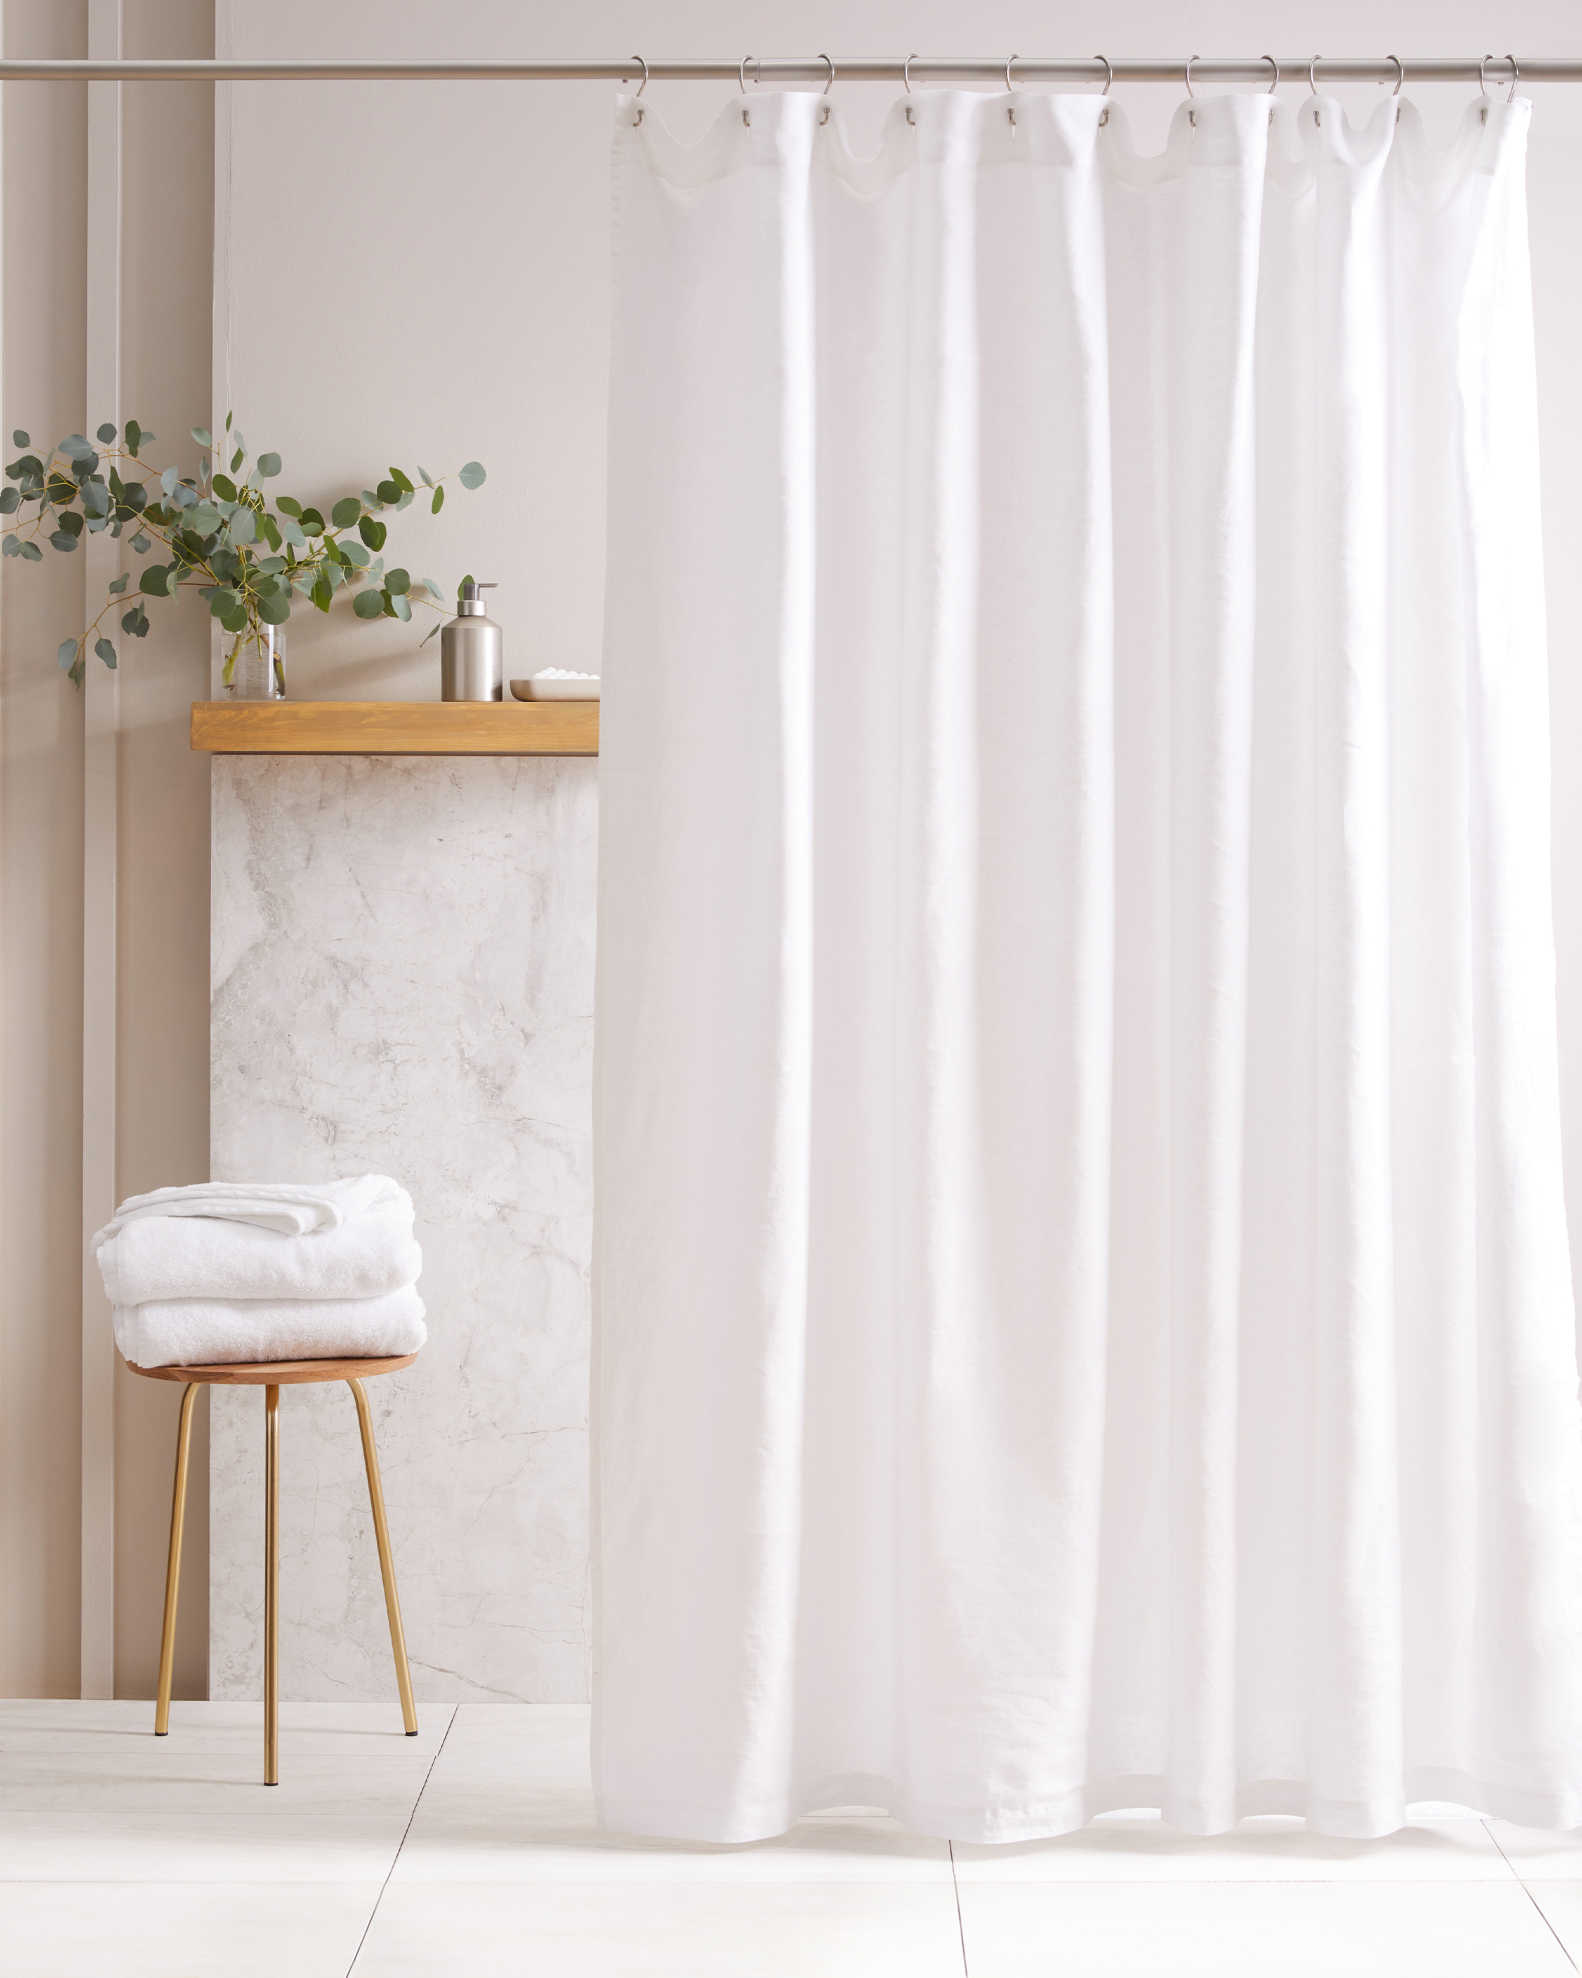 A white shower curtain hangs in a bathroom with a towel on a stool, a small shelf with a plant, and toiletries in the background.